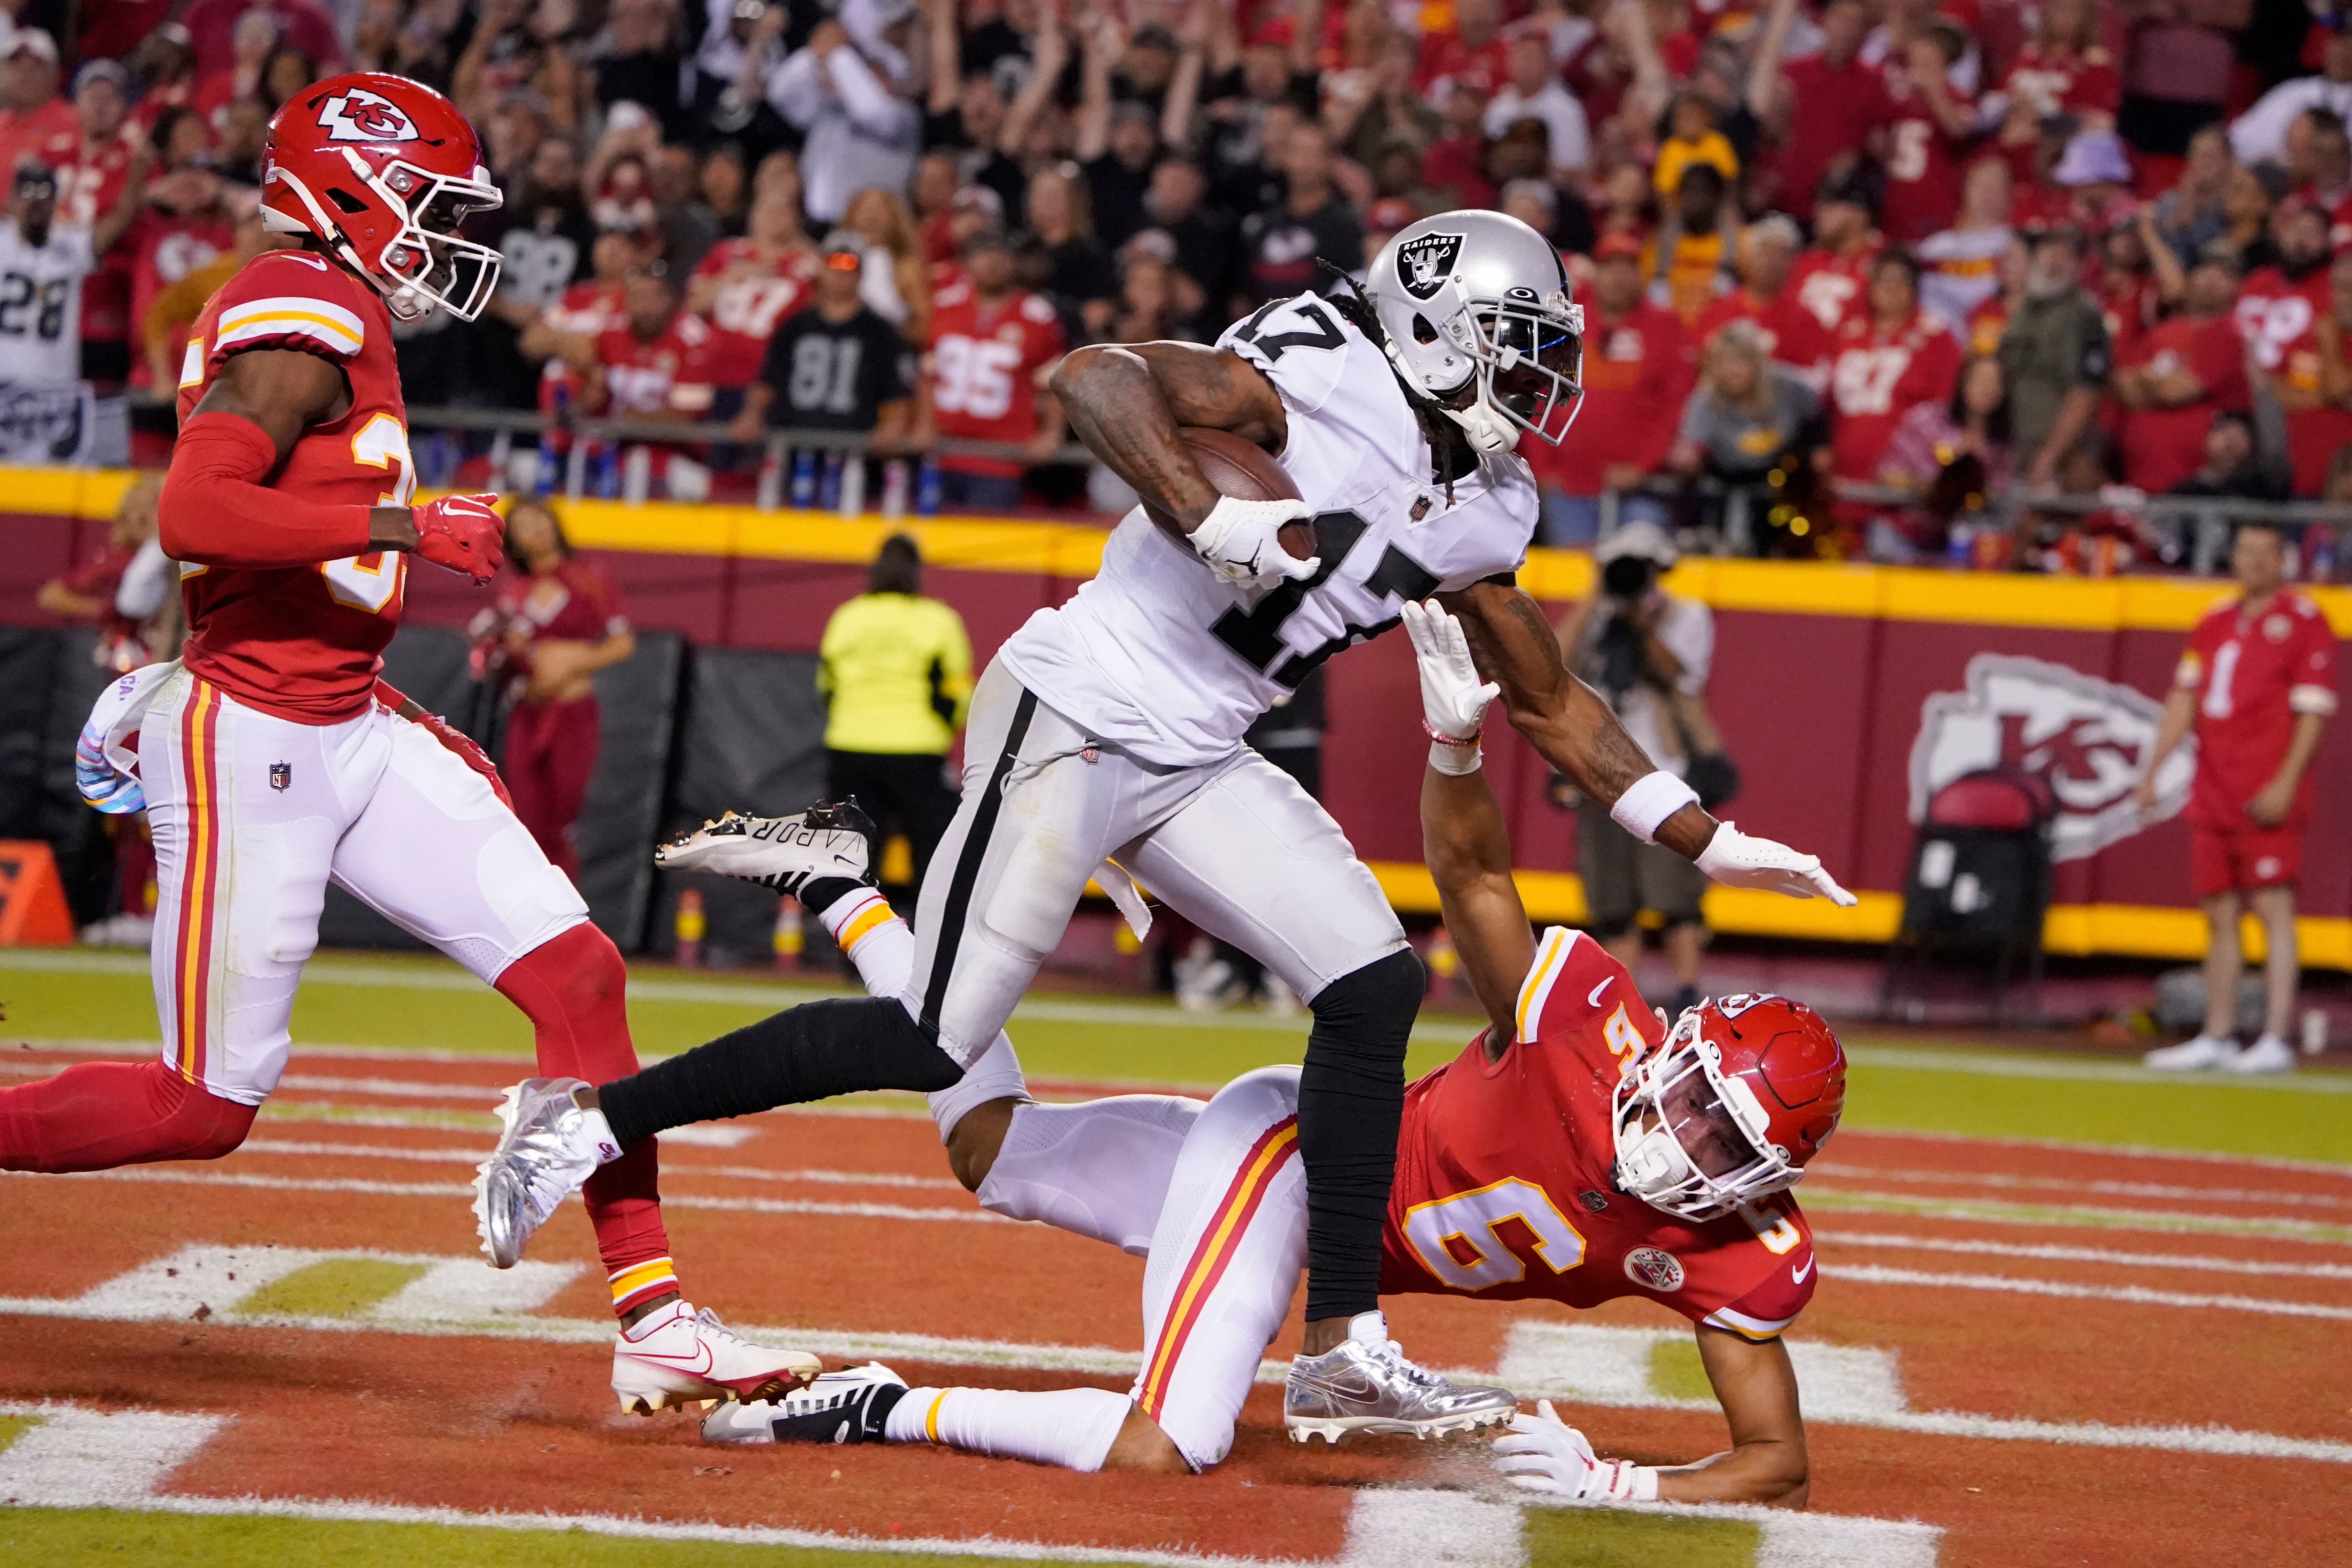 AP source: Raiders' Adams could be suspended for shove